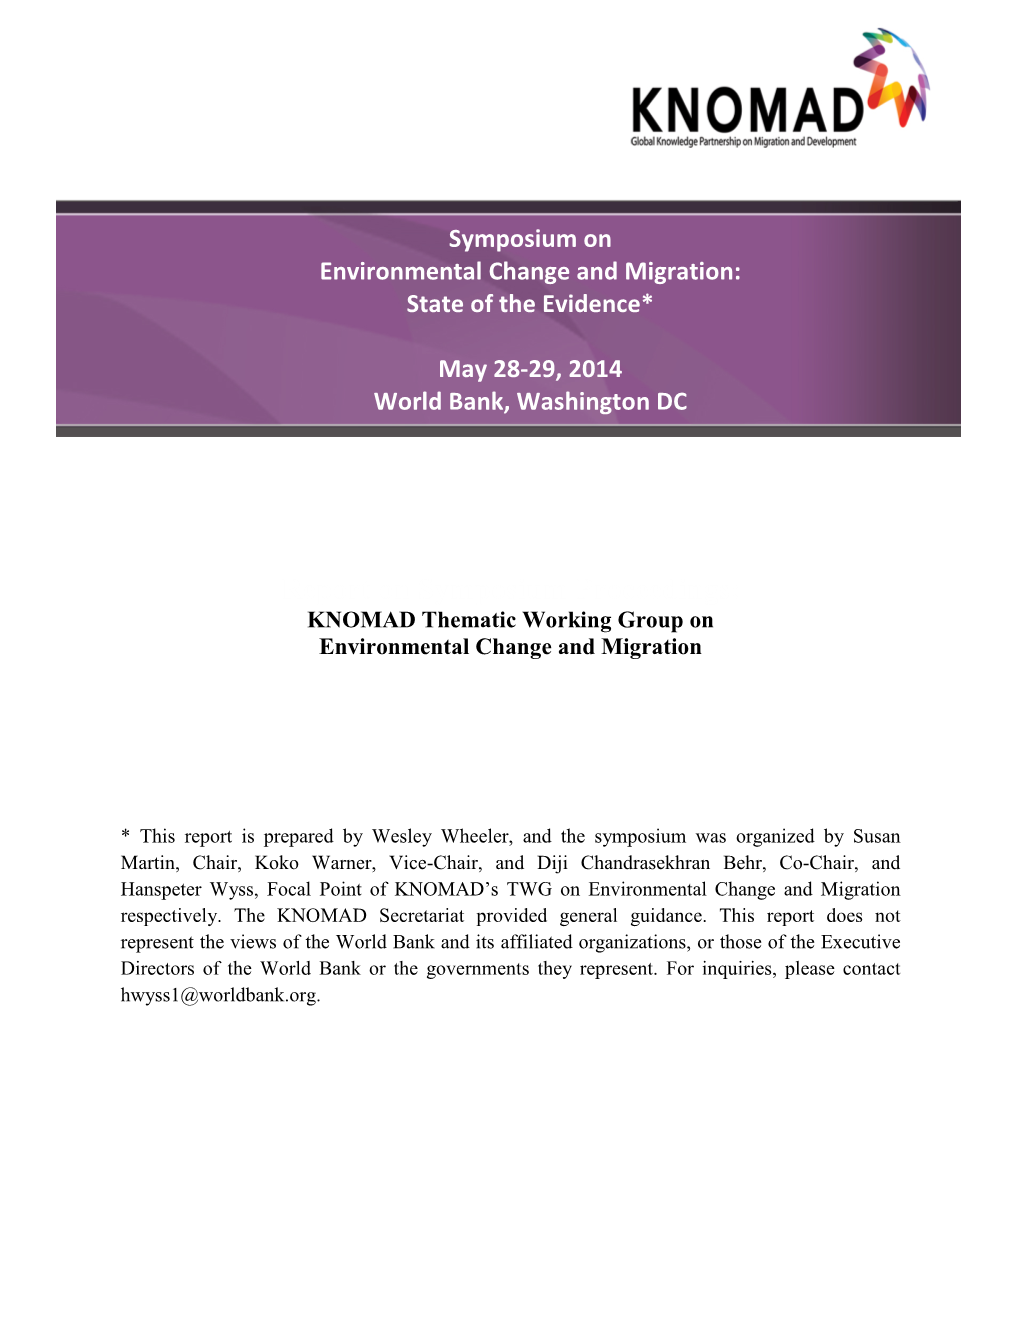 Report on Symposium Proceedings: KNOMAD Thematic Working Group on Environmental Change and Migration